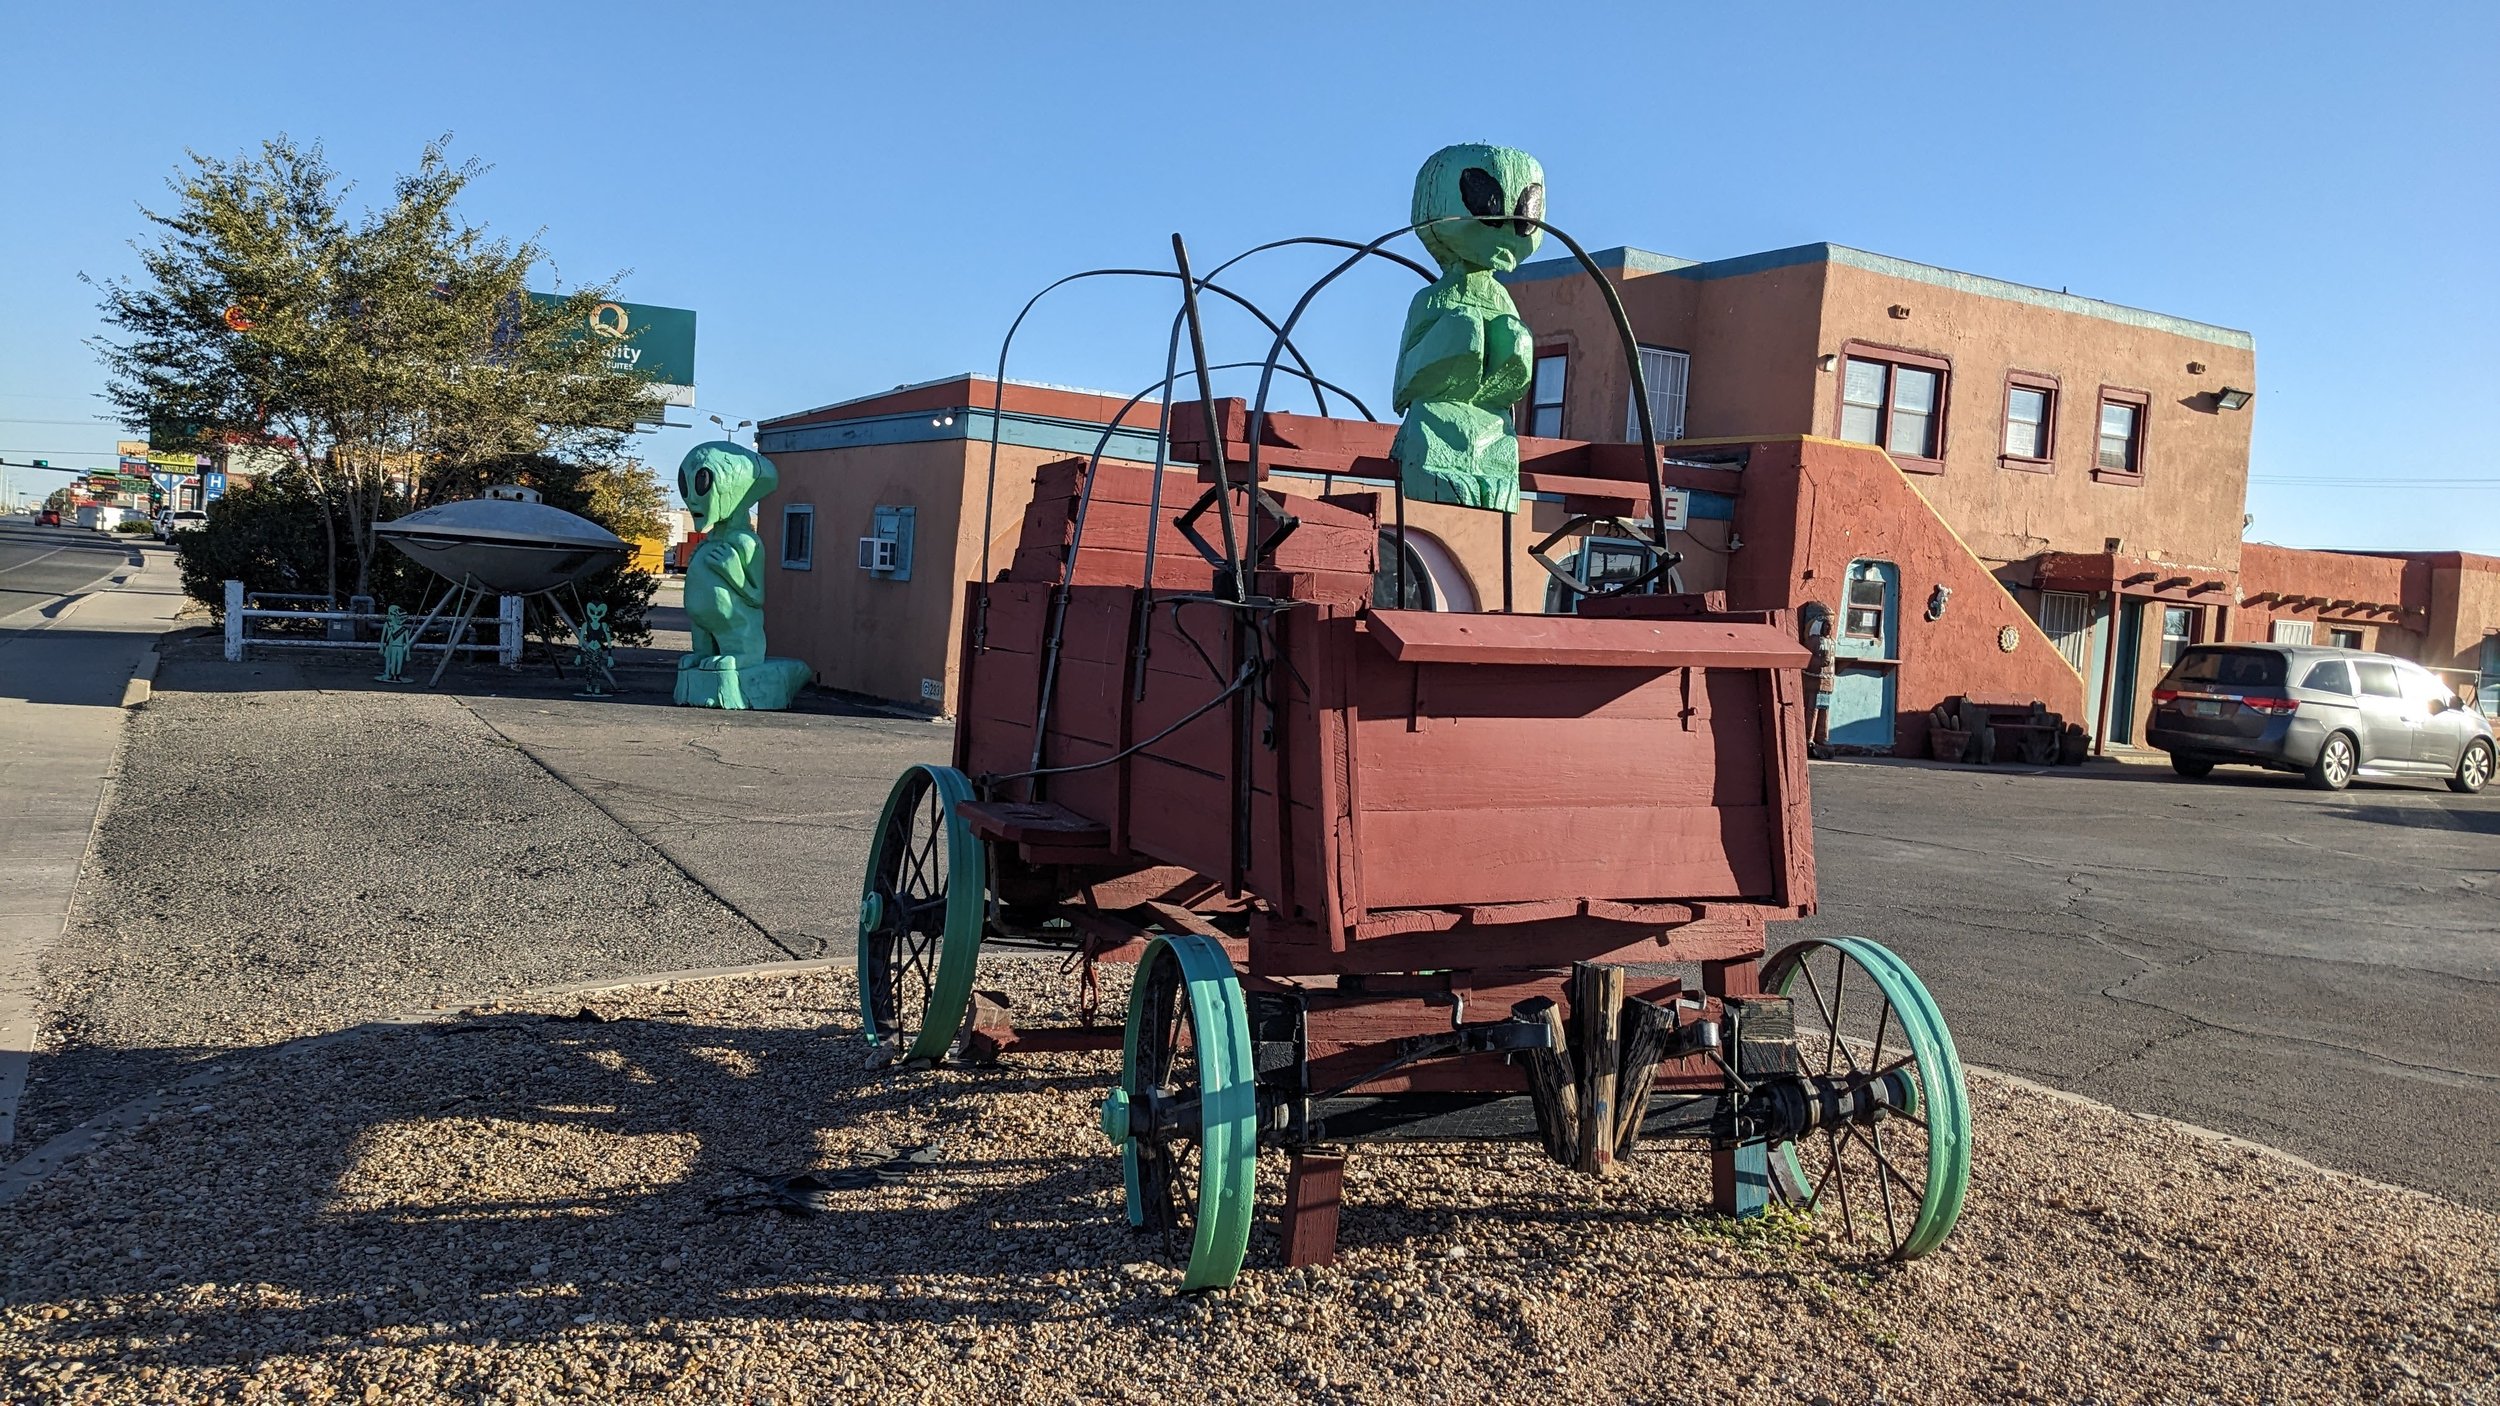 Alien Driving a Stage Coach in Roswell New Mexico